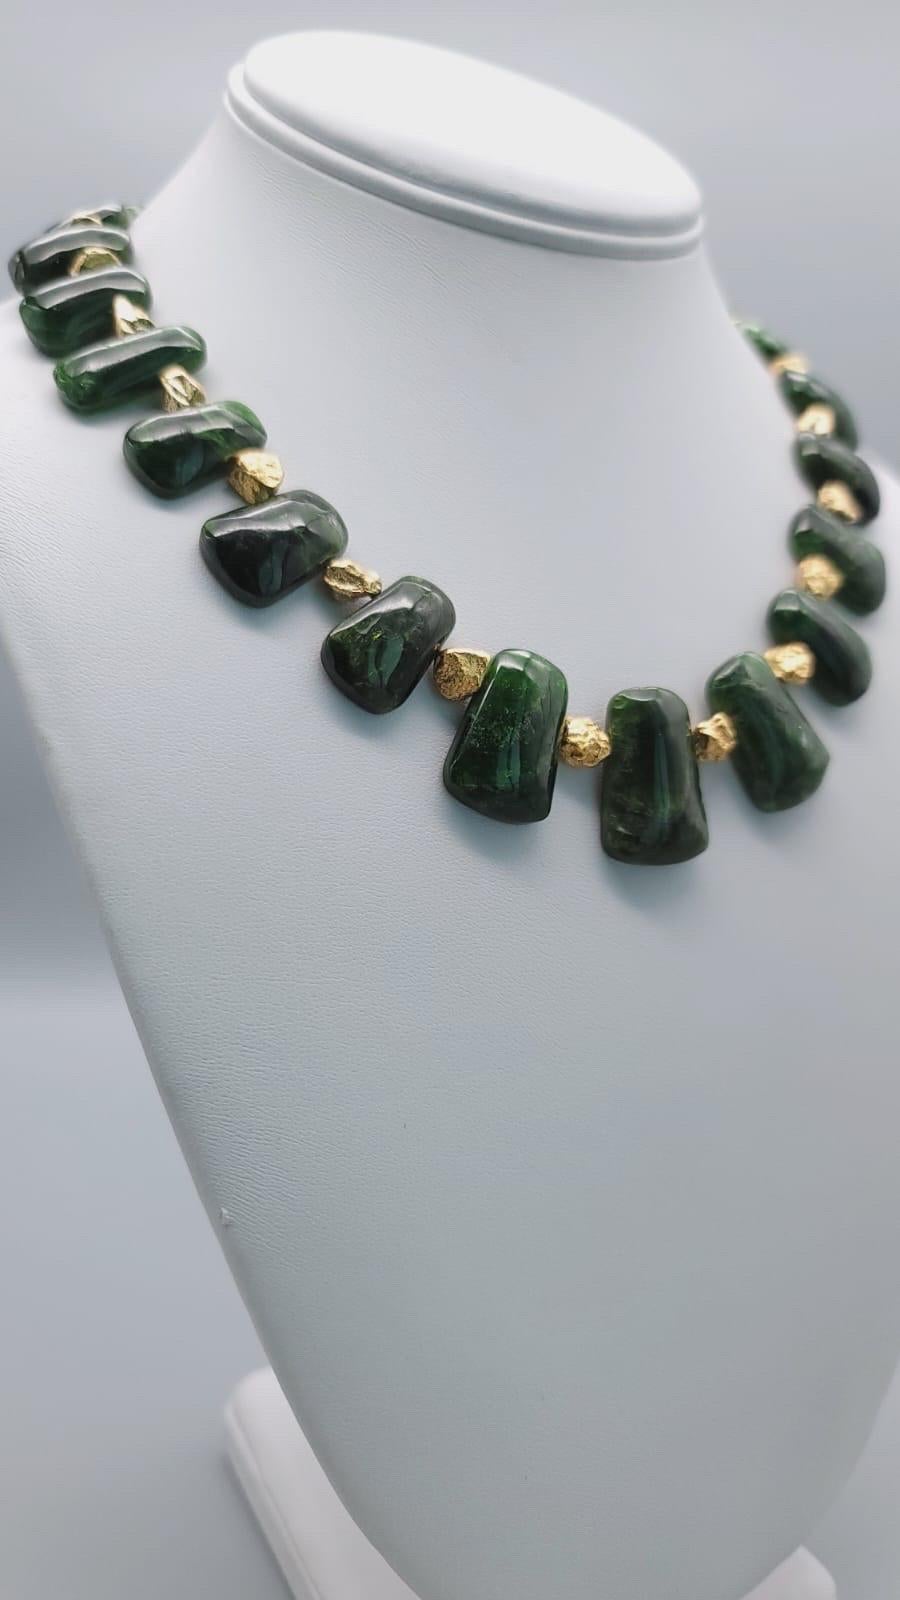 A.Jeschel Richly colored Chrome Diopside necklace 4